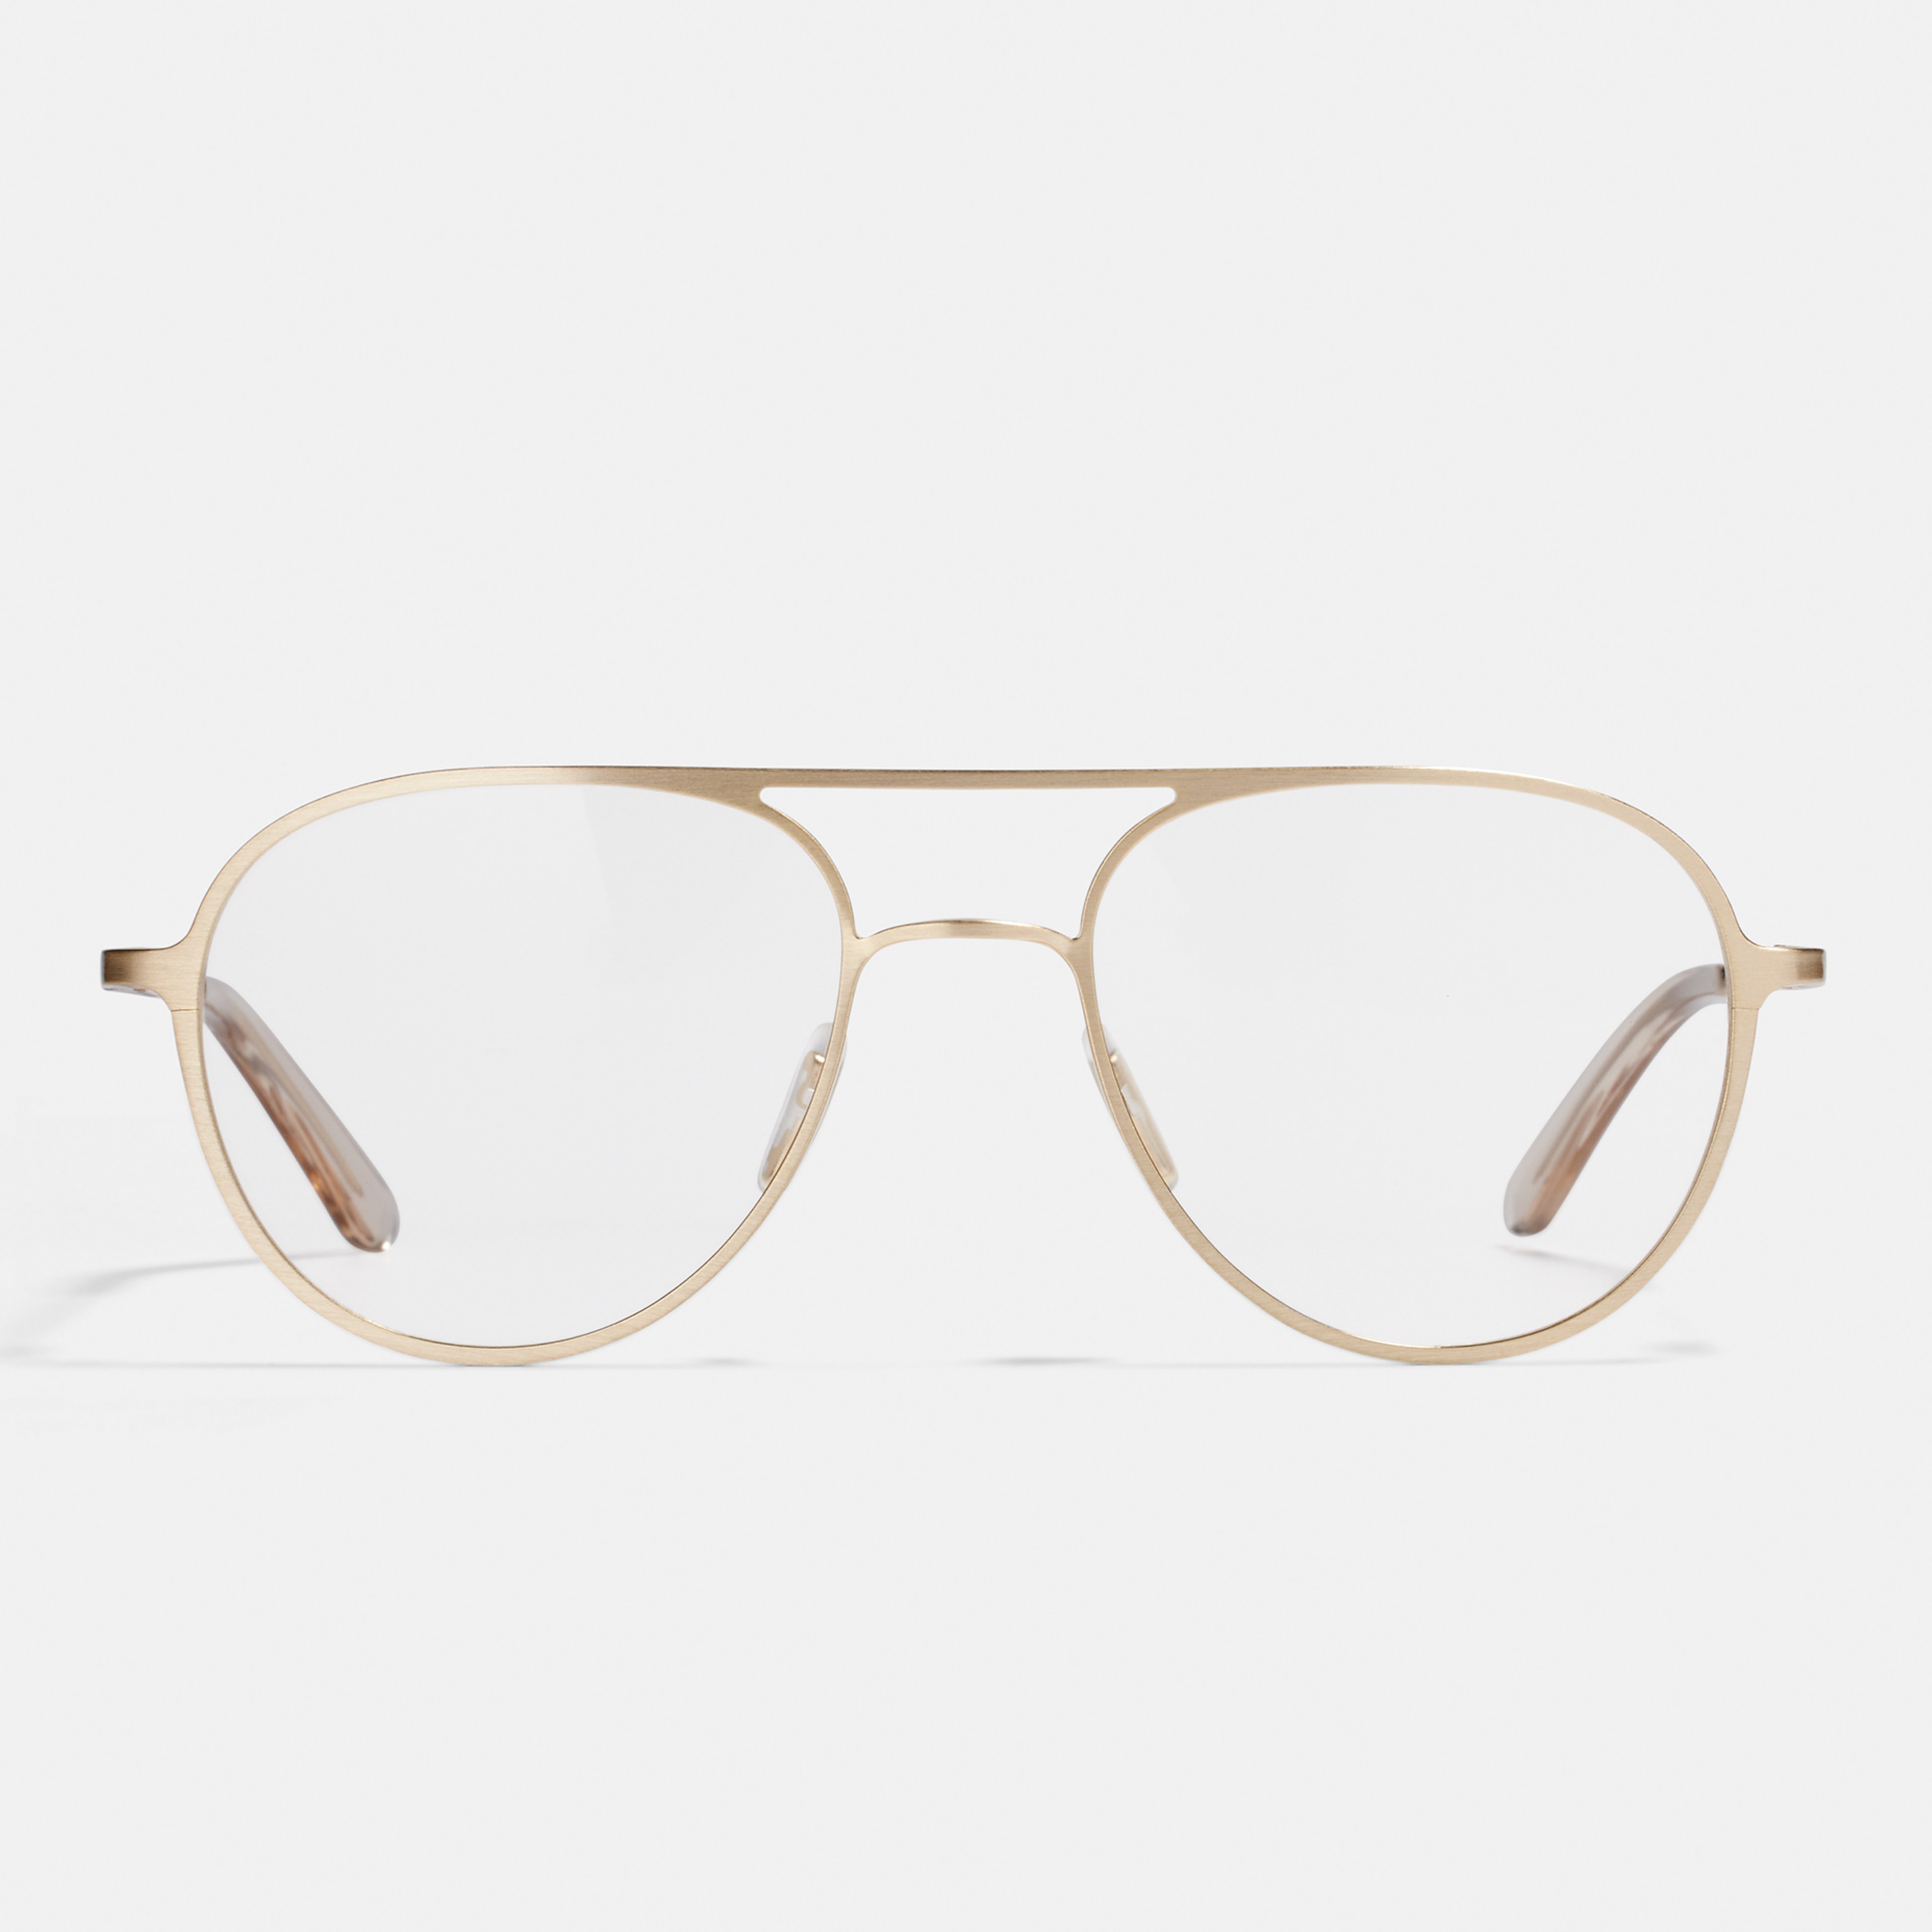 Ace & Tate Glasses |  Metal in Gold